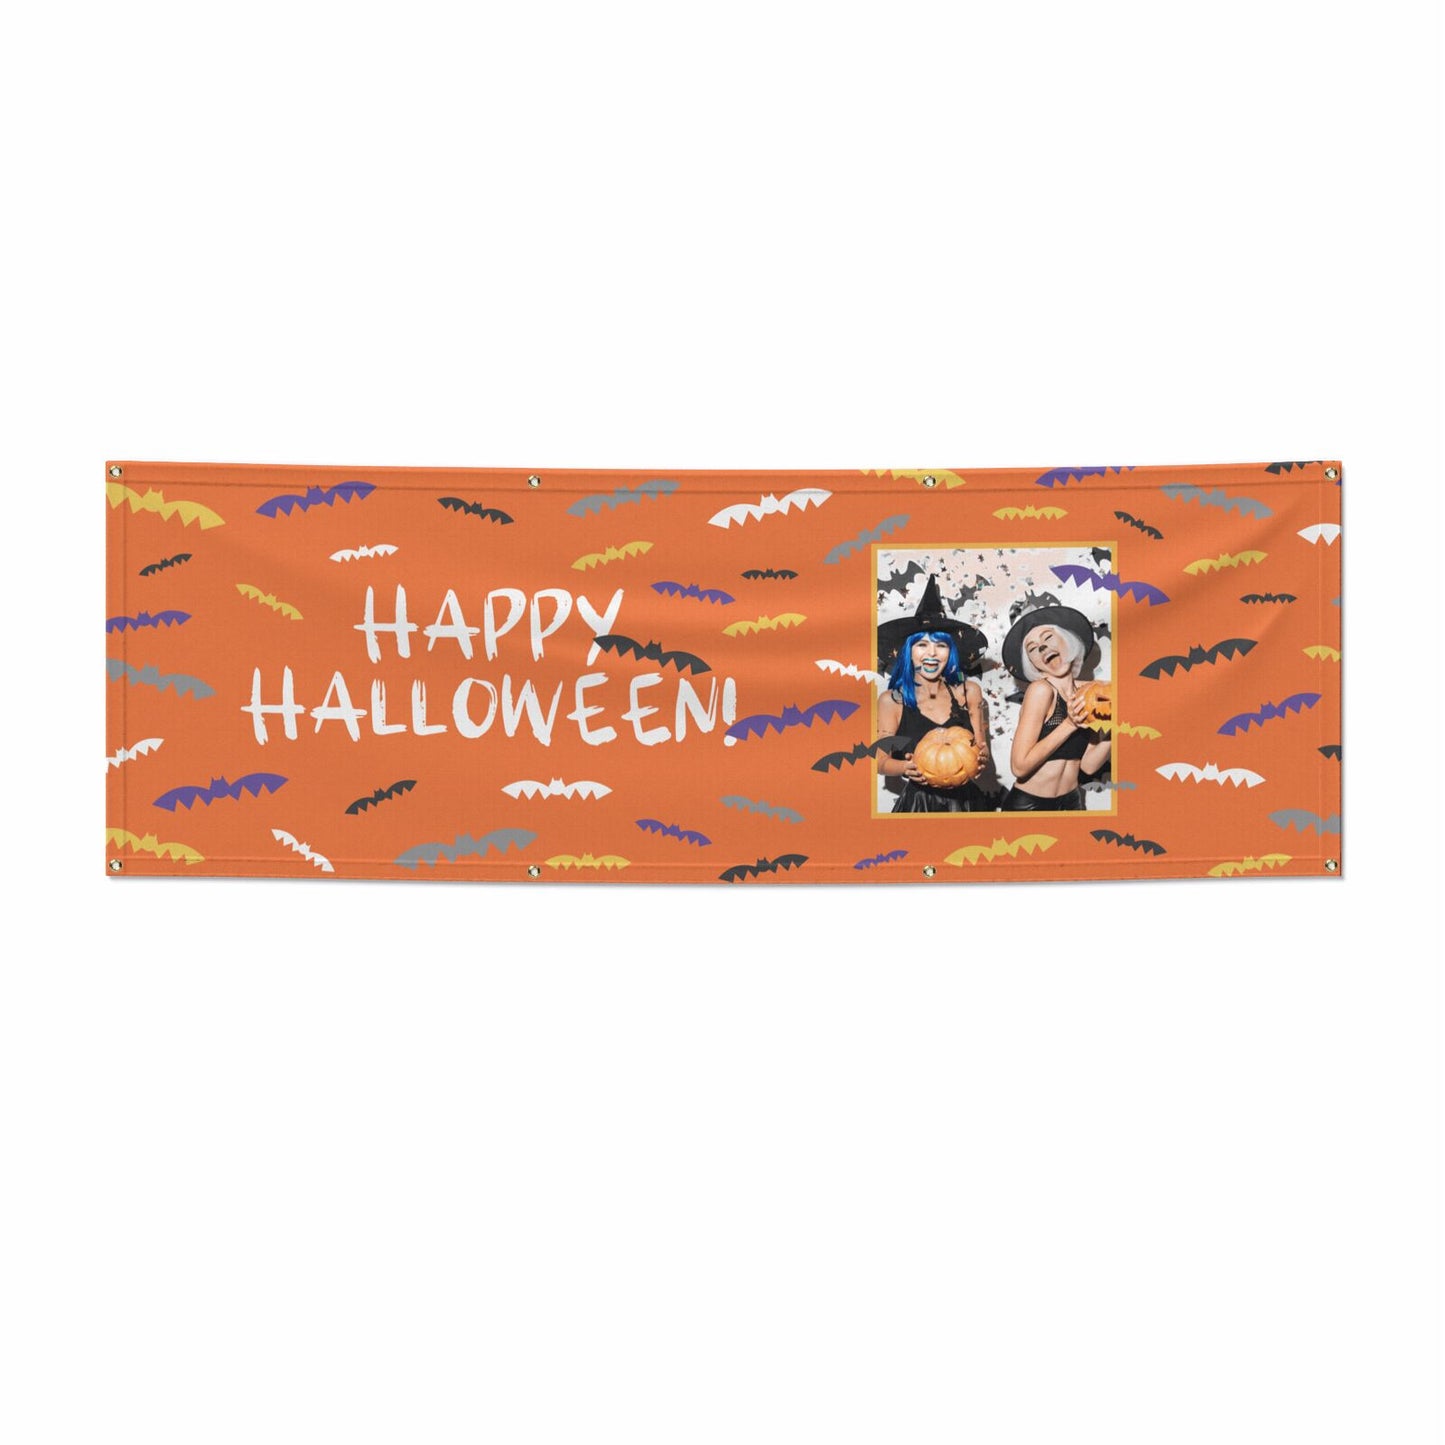 Personalised Halloween Bats Photo Upload 6x2 Vinly Banner with Grommets